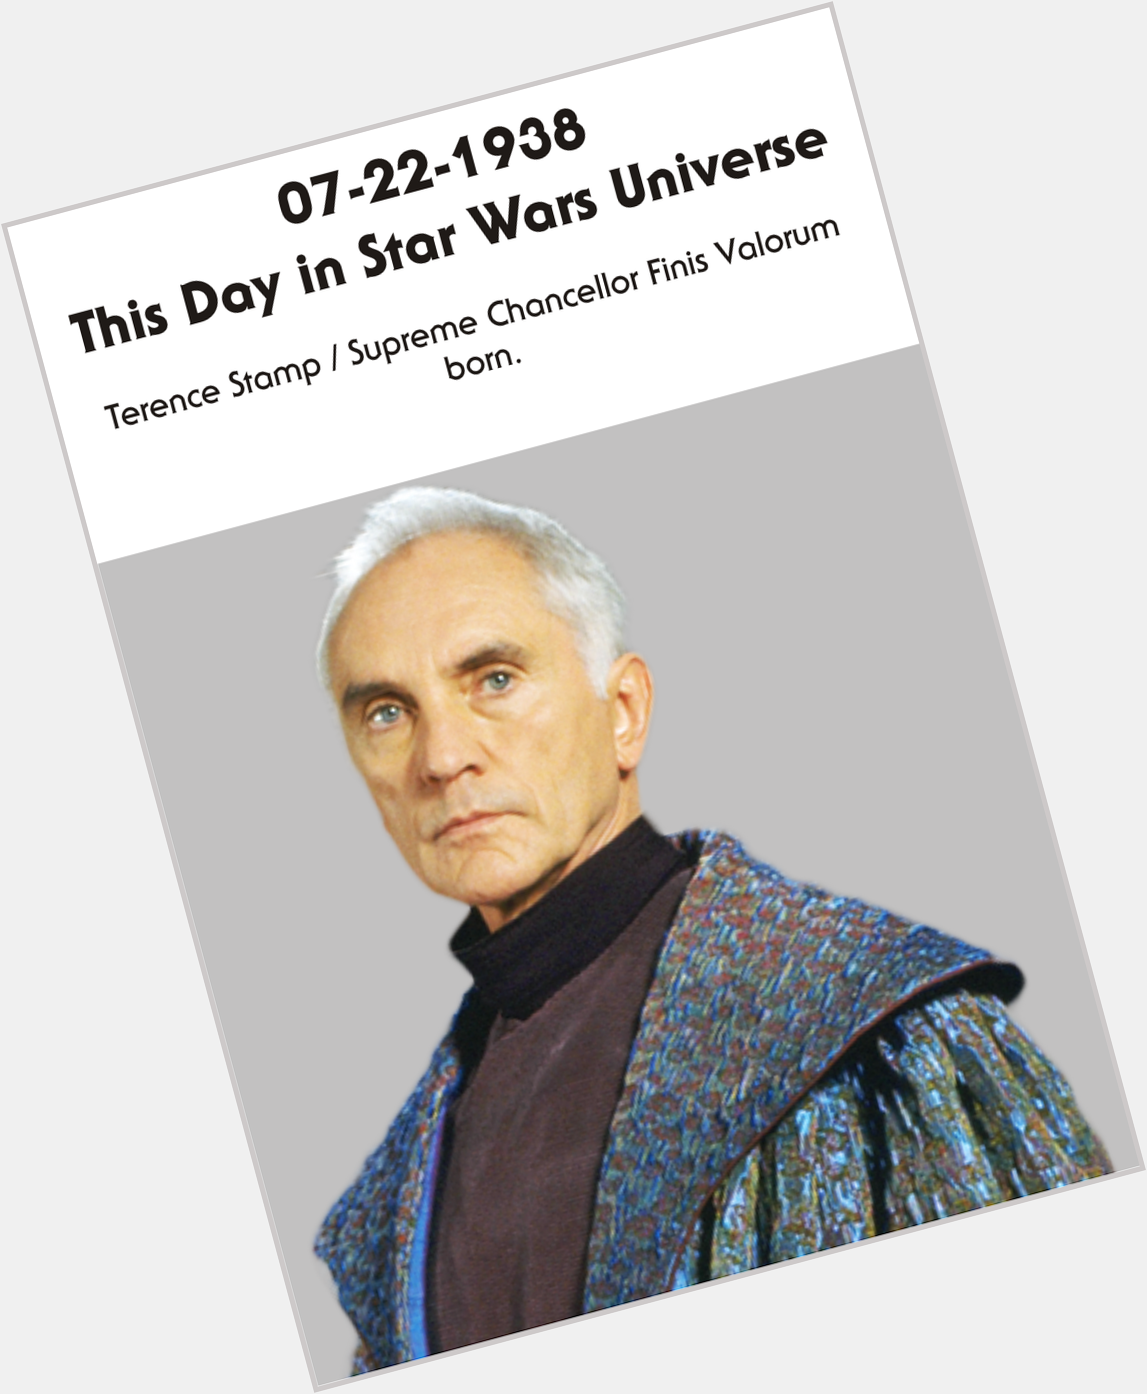  Happy Birthday to Terence Stamp who turns 77 today. 